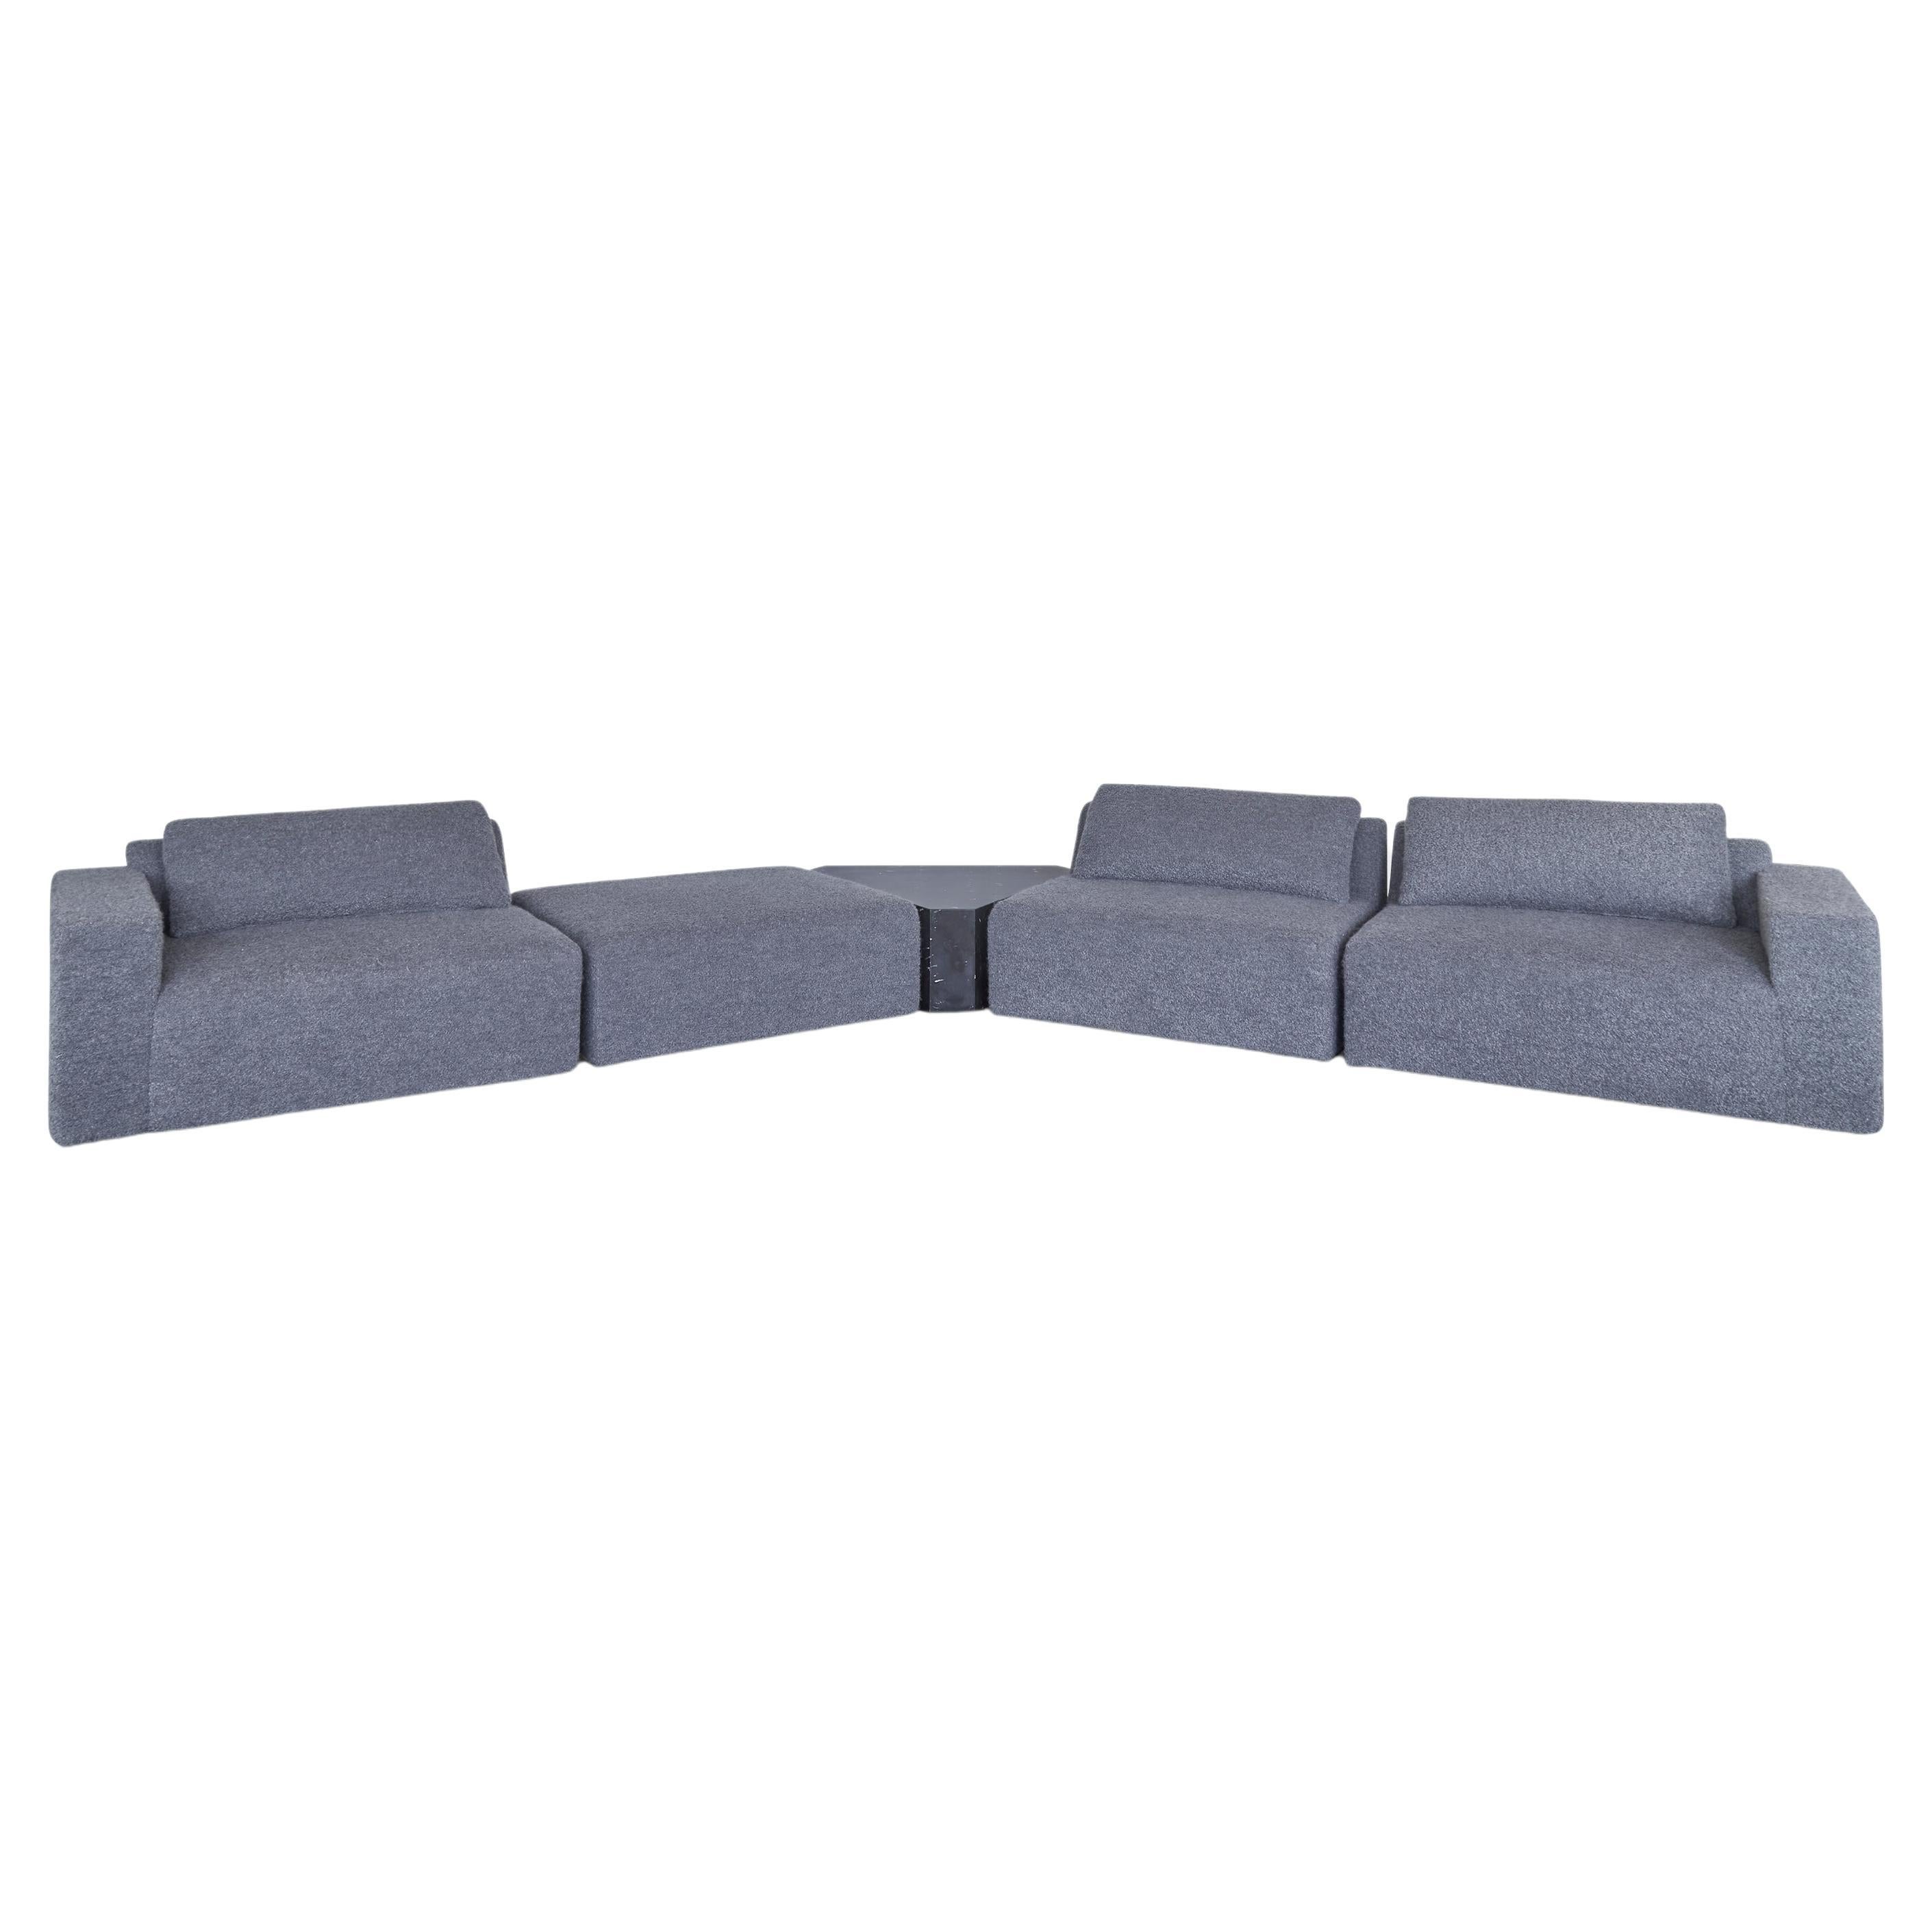 Oberon Sectional Sofa by Atra For Sale